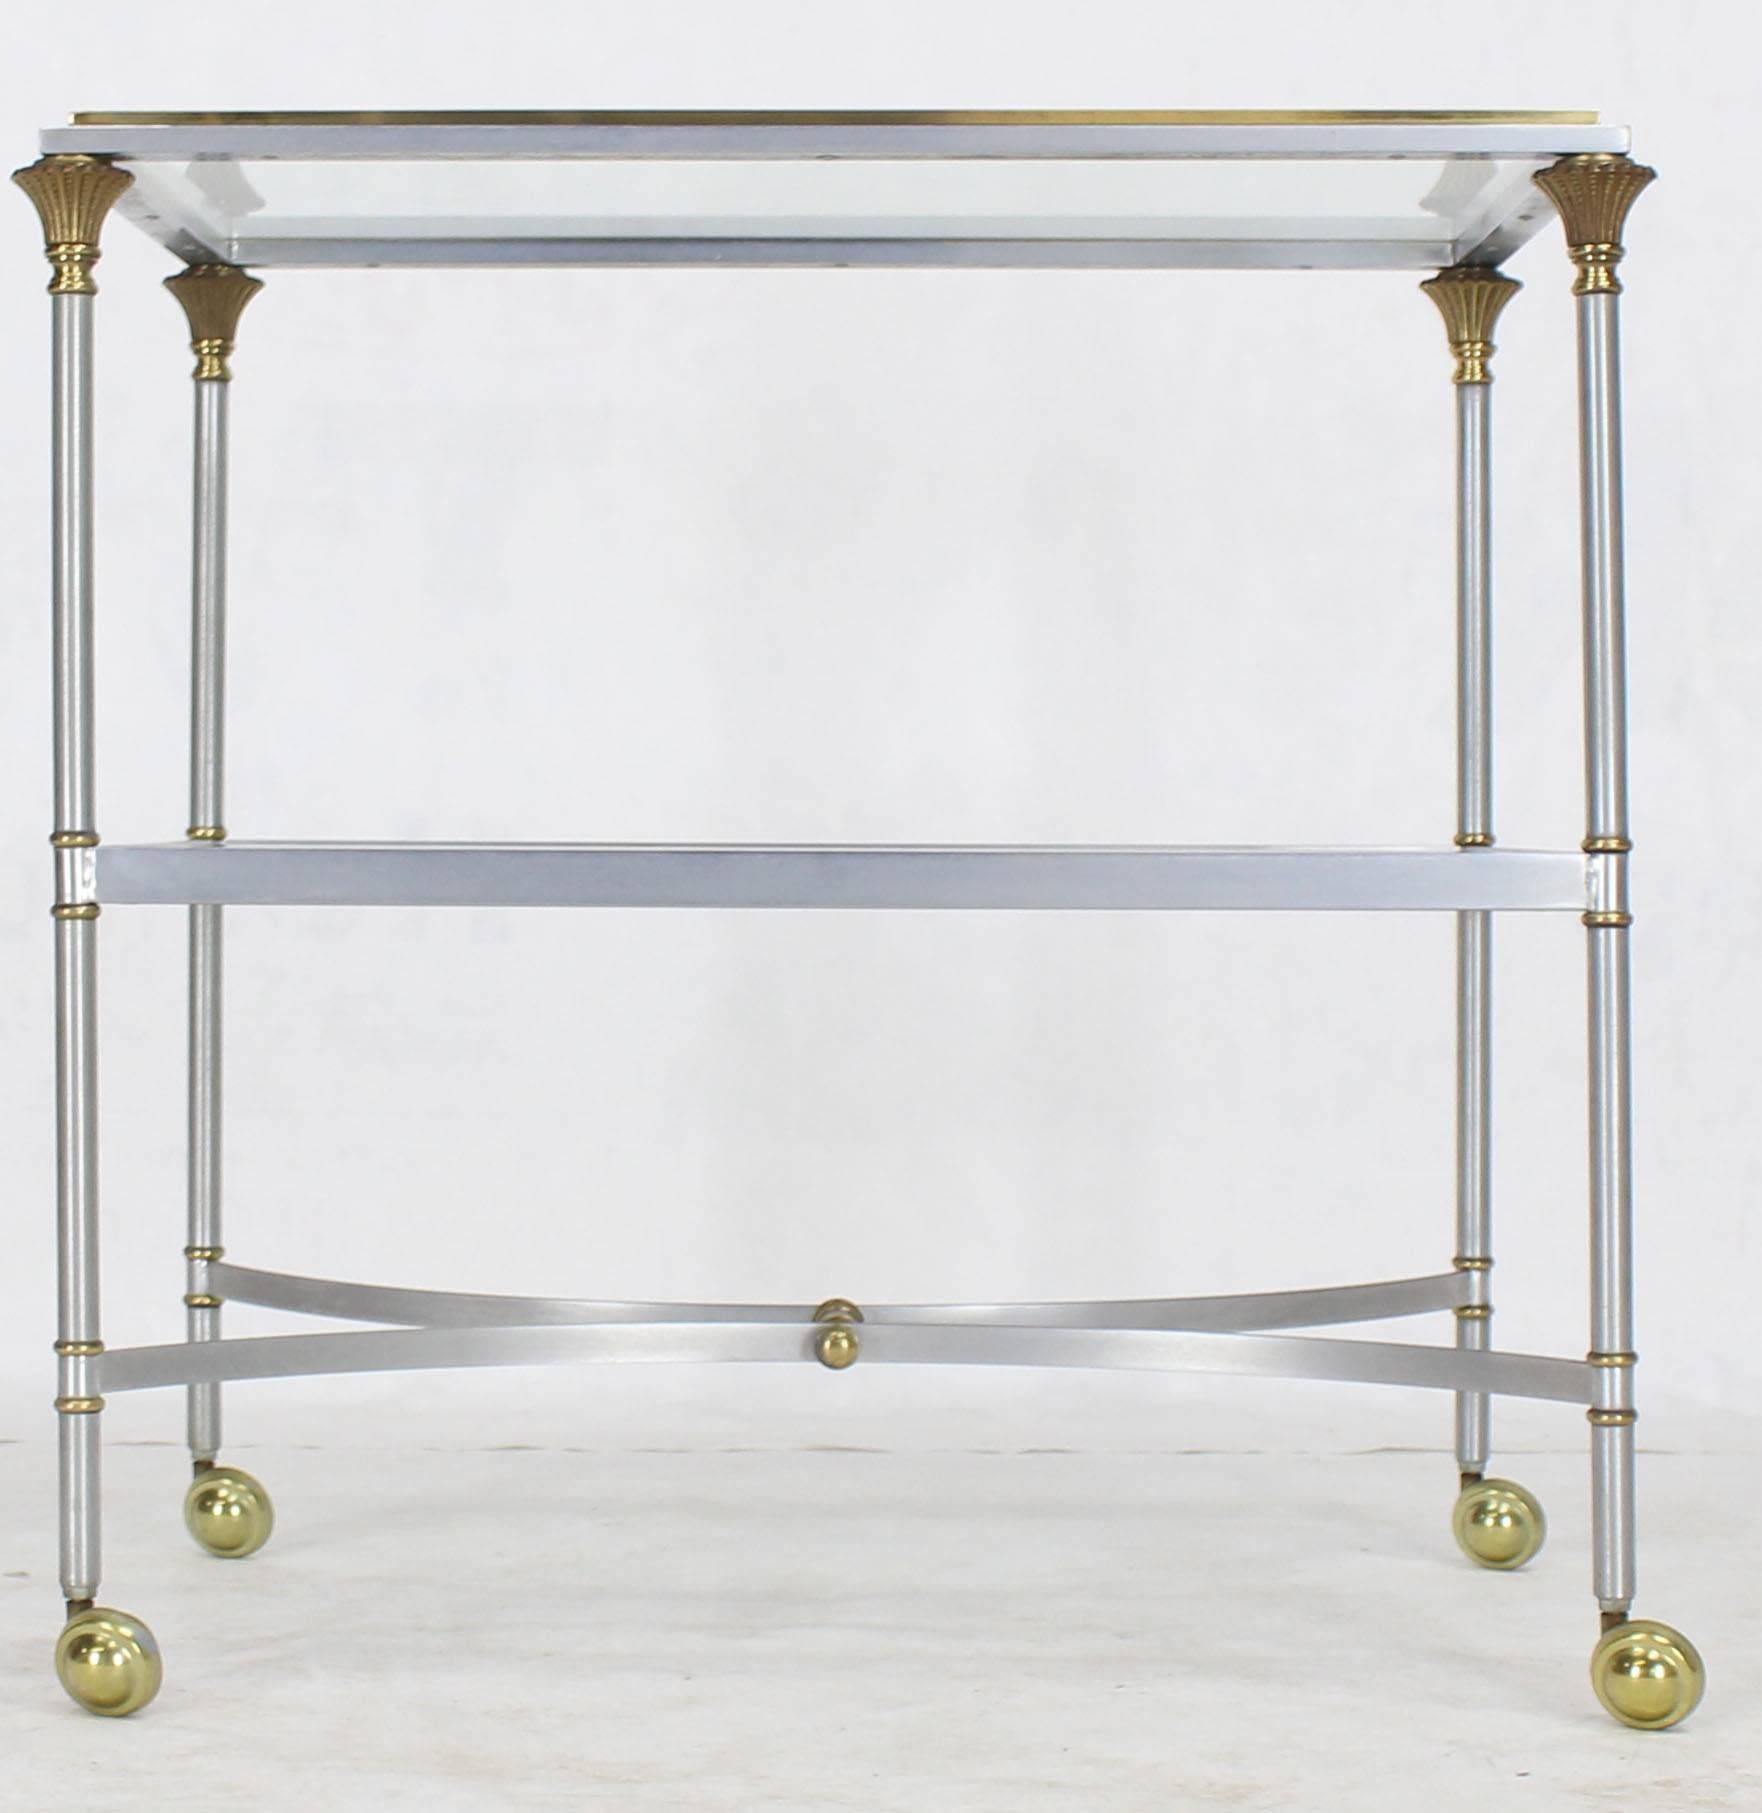 Polished Two-Tier Brass Chrome Glass Rectangular Mid-Century Modern Serving Bar Cart For Sale